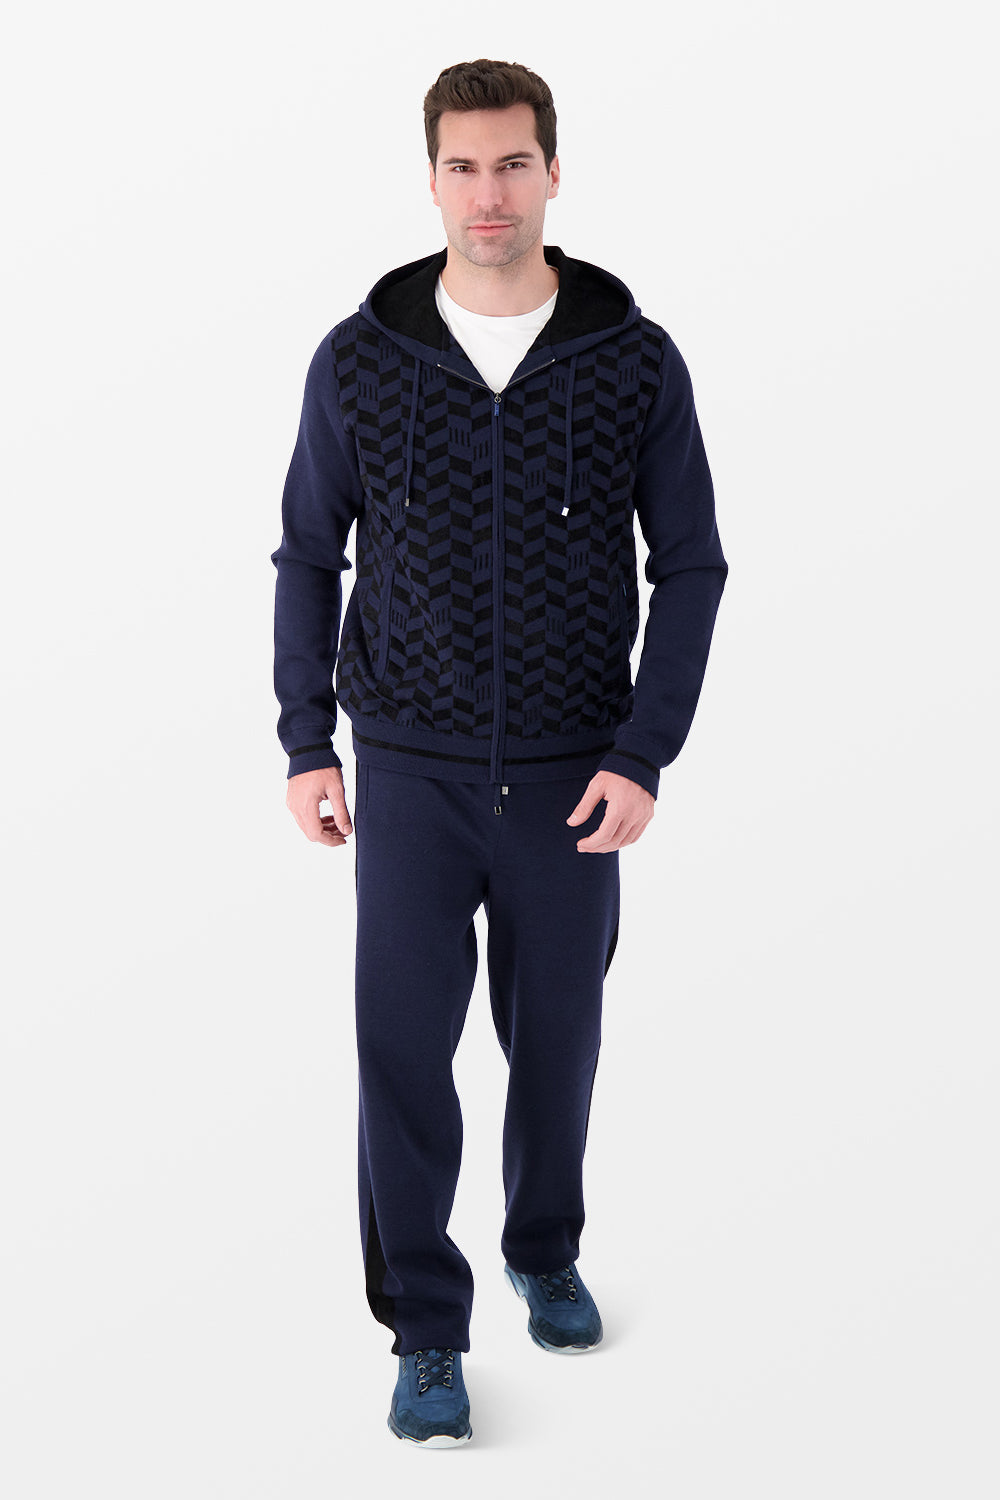 Multicolor Fabric: Lycra Track Suit For Men at Rs 850/piece in